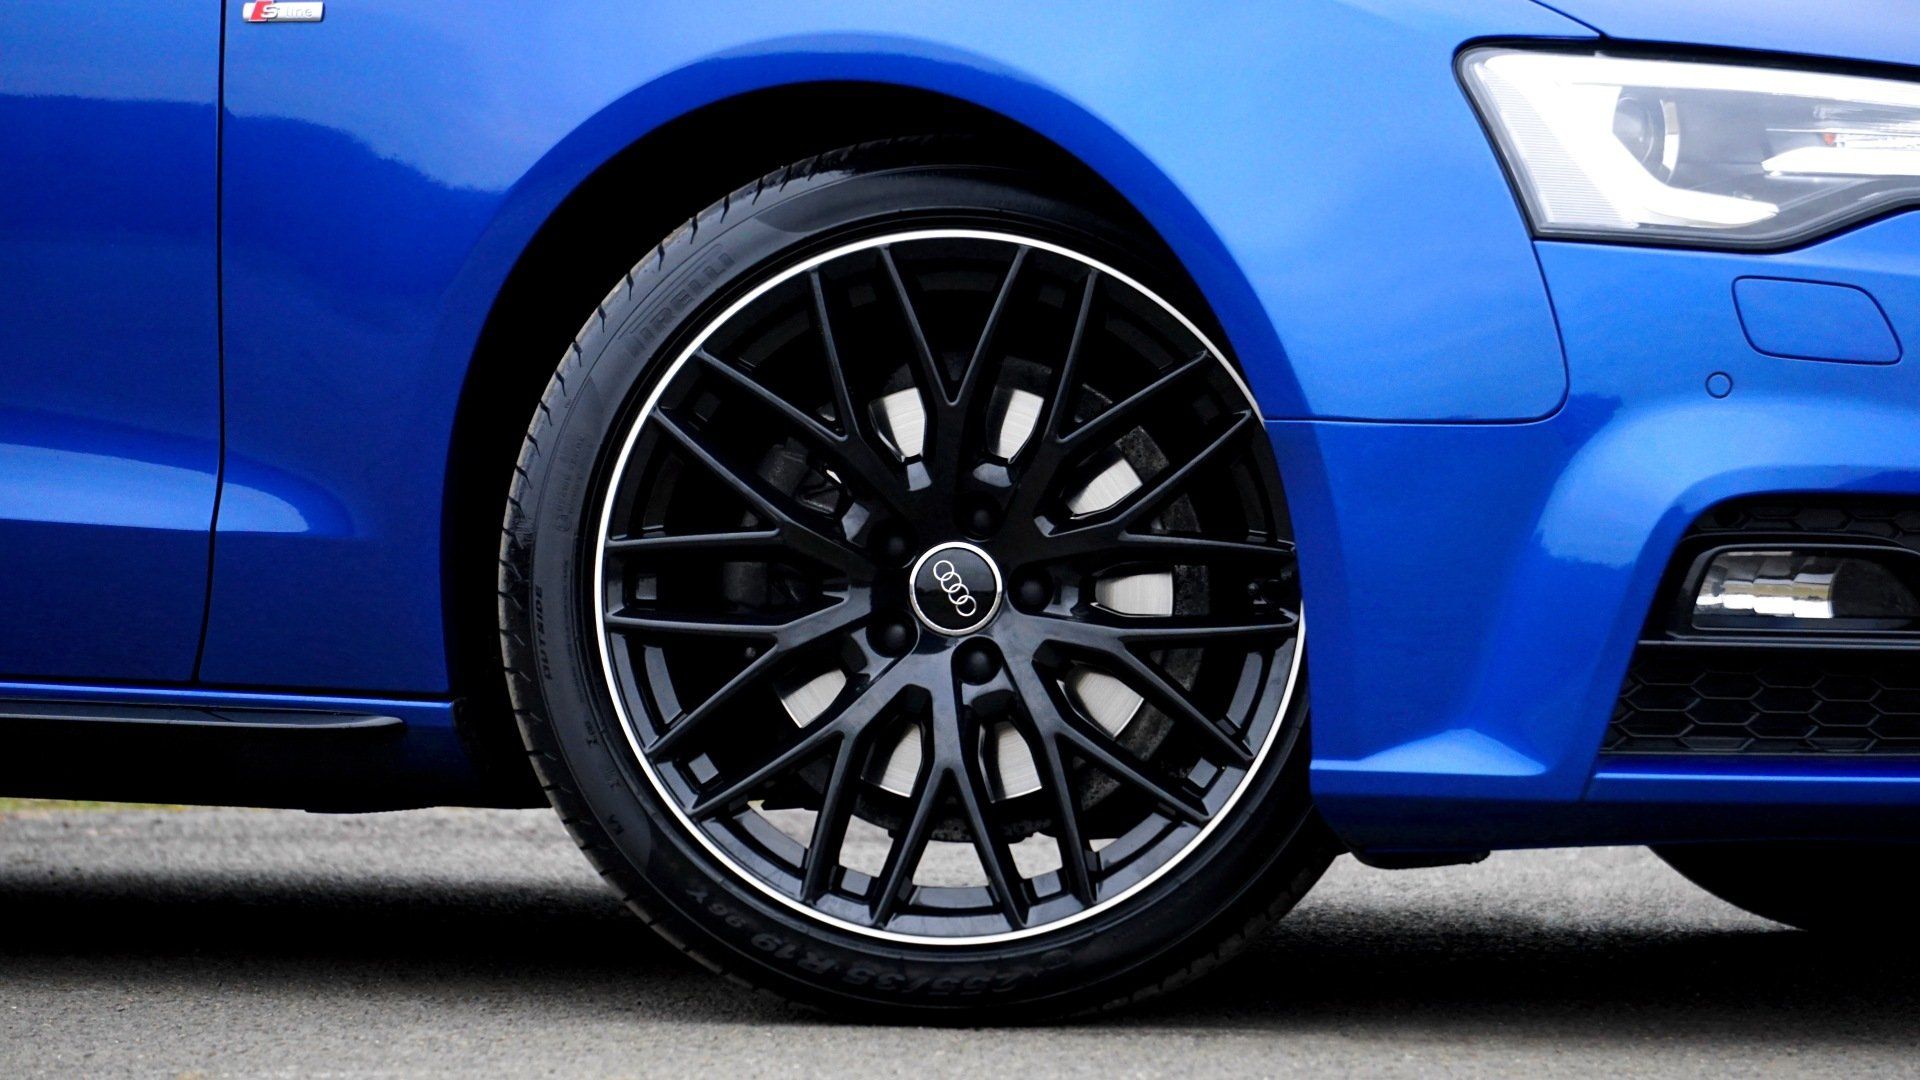 A close up of a blue car with black wheels and tires.